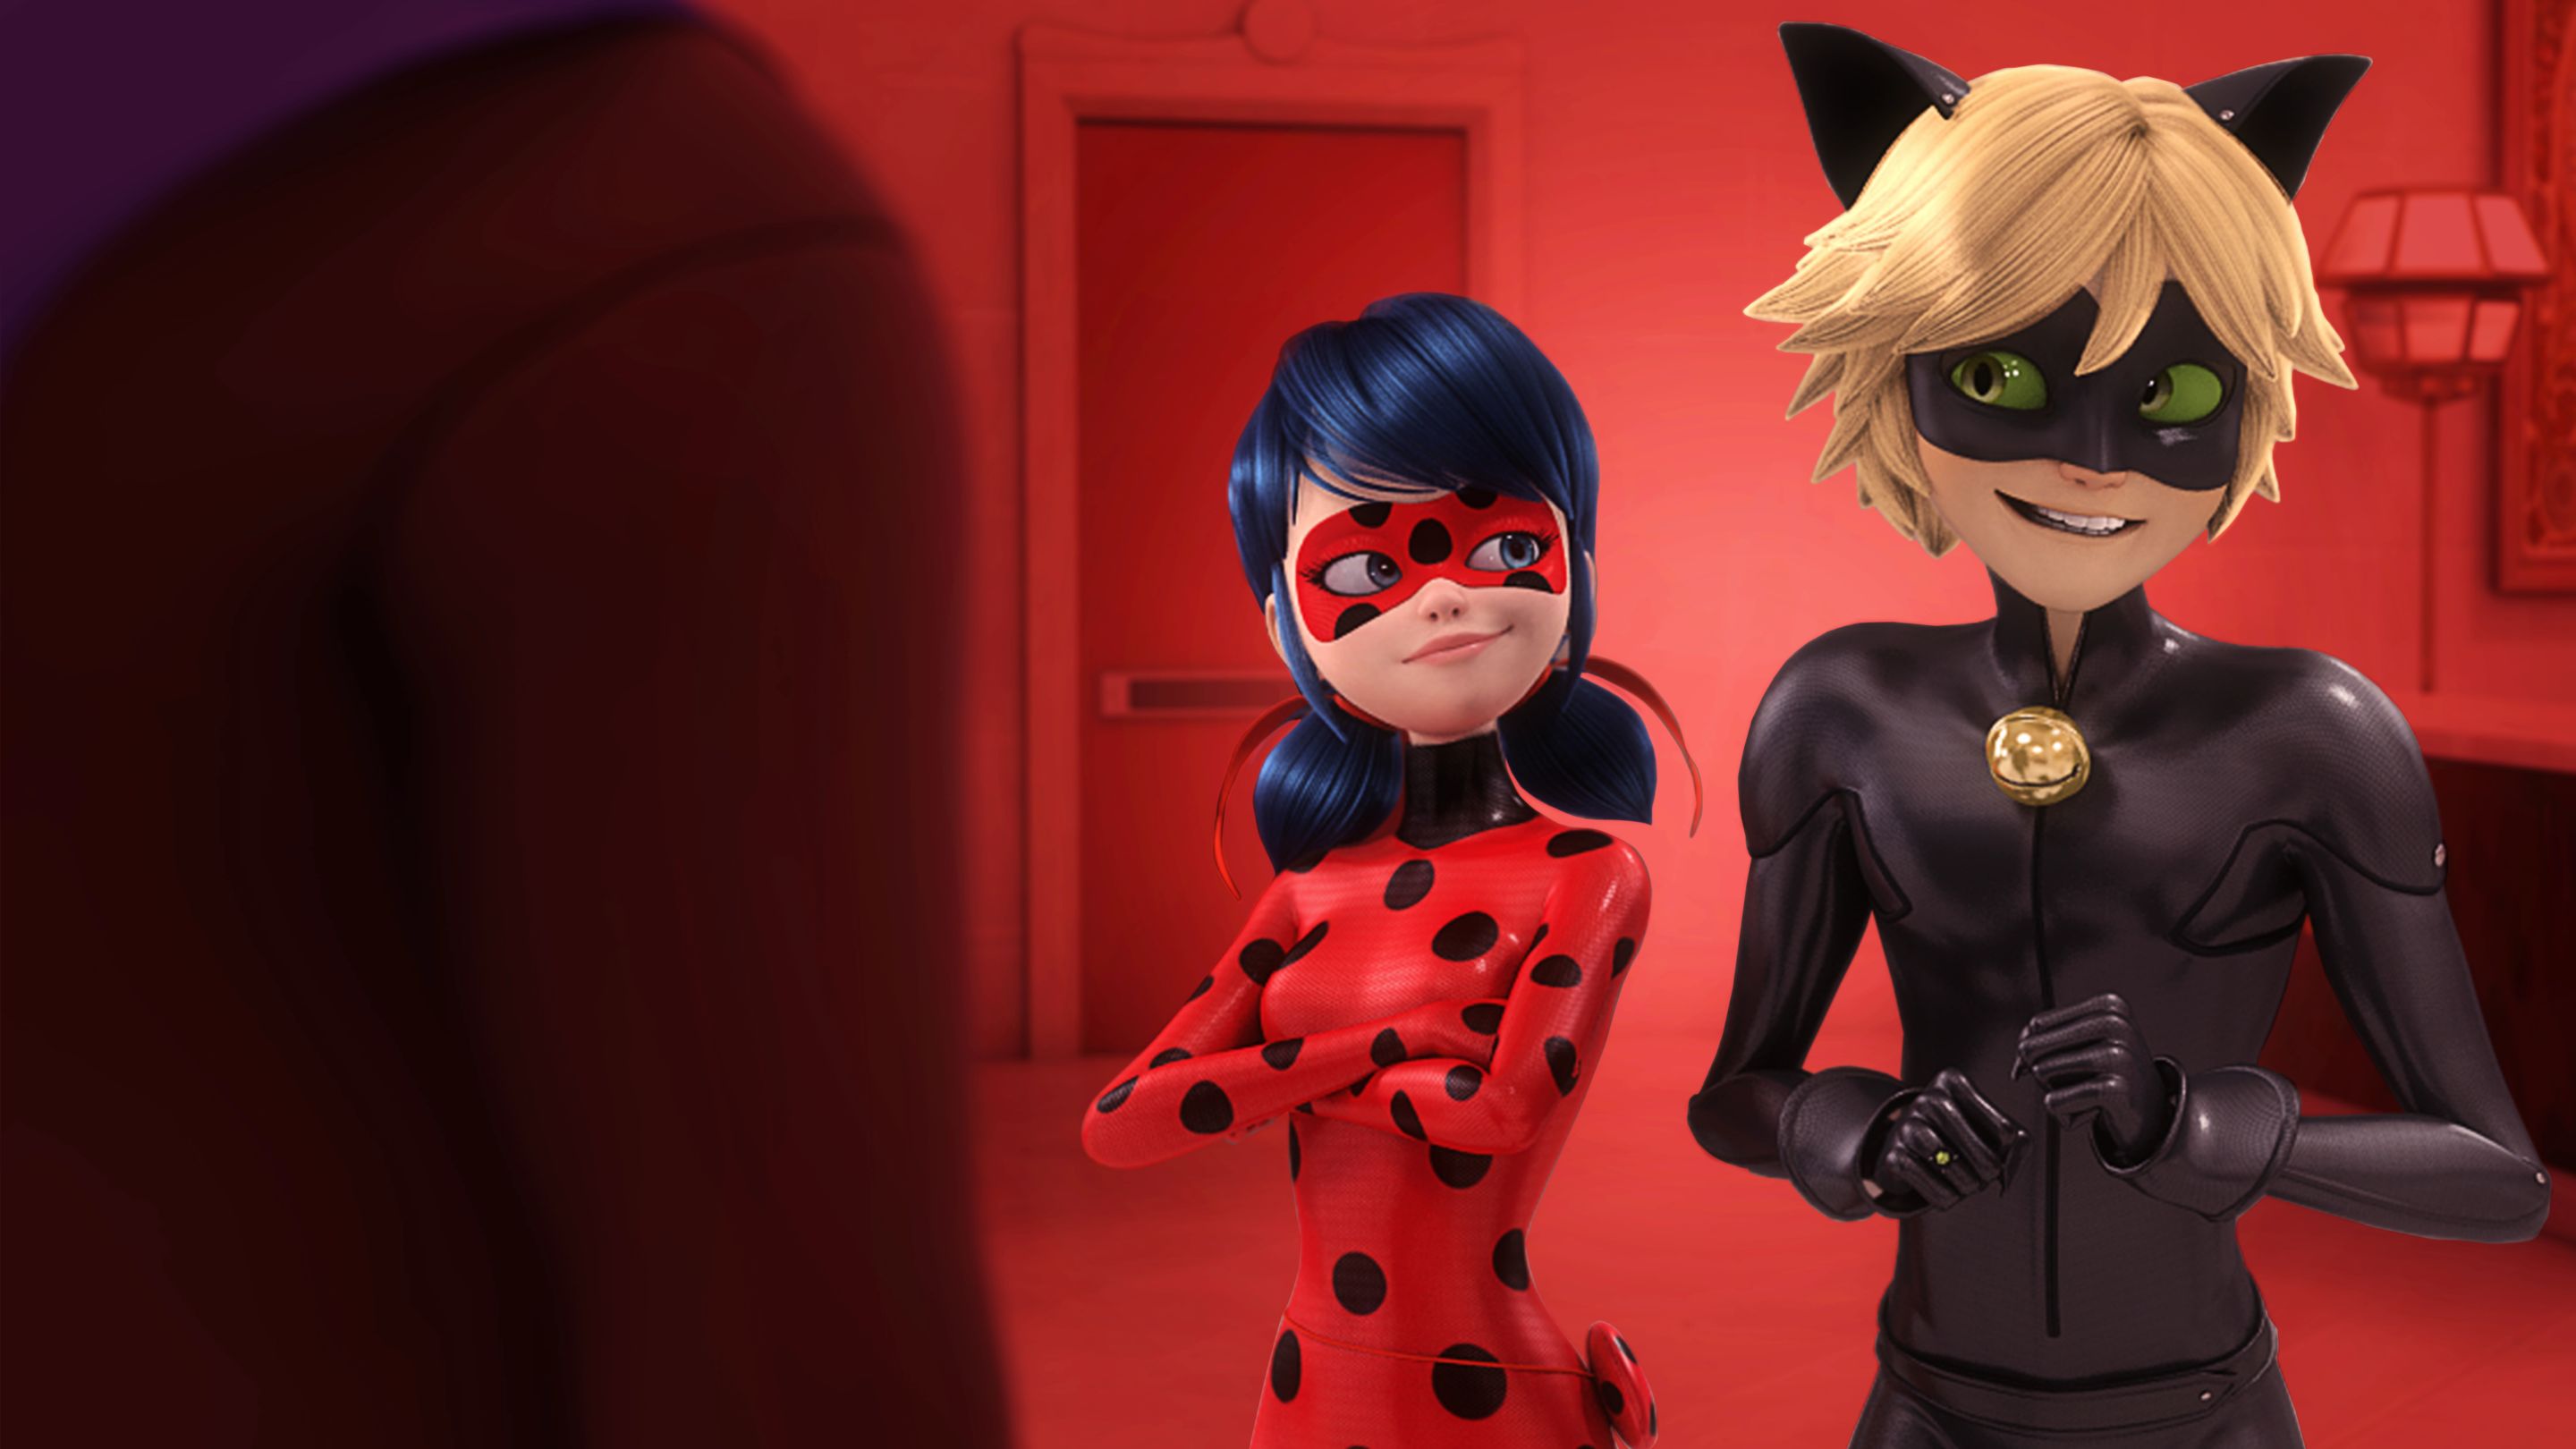 Where can i watch miraculous ladybug